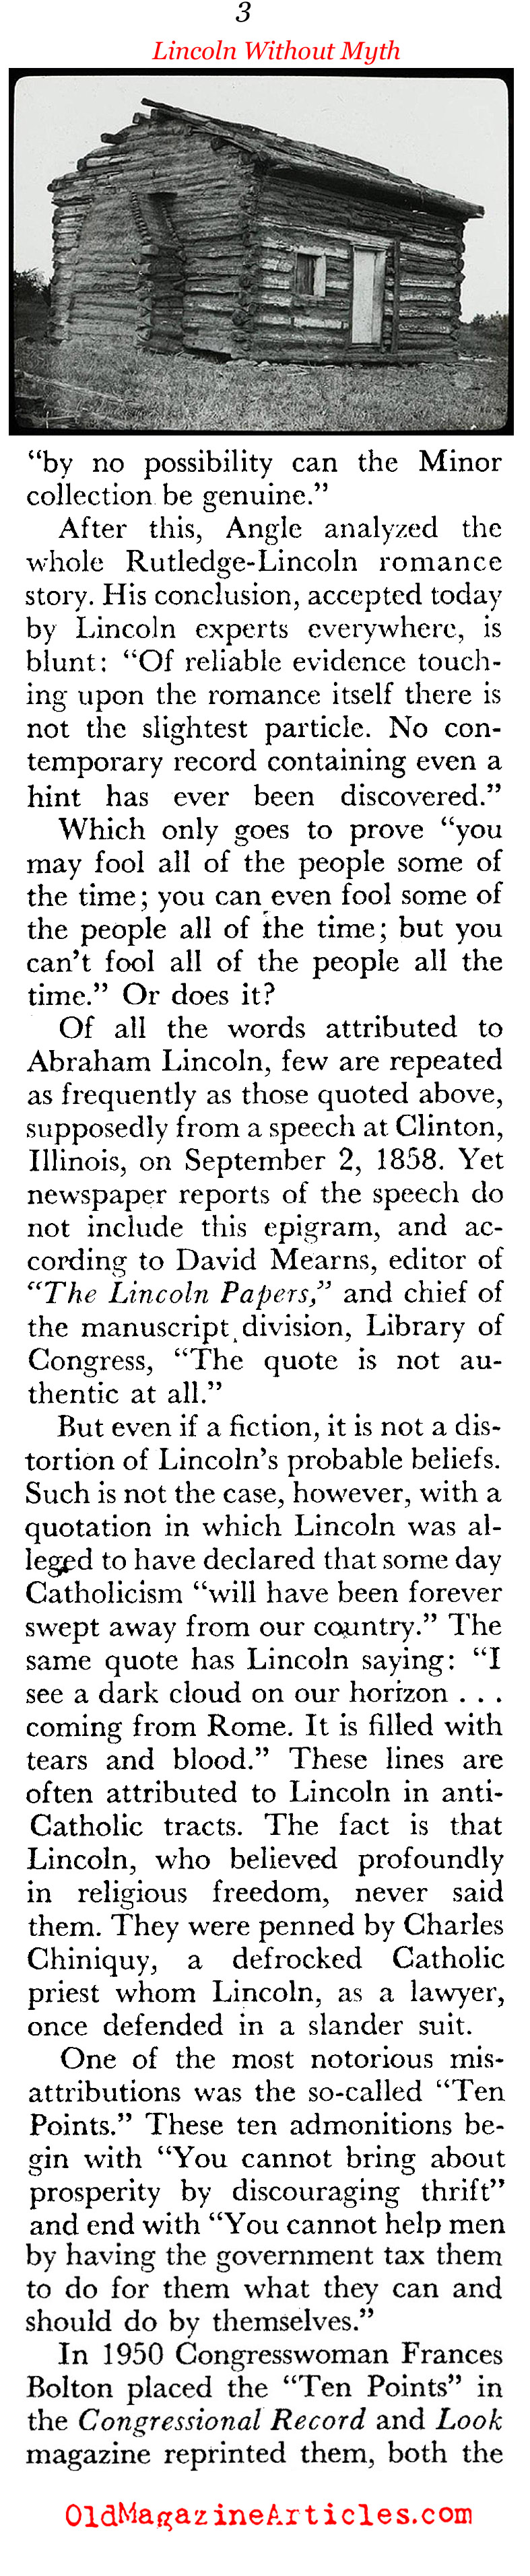 Lincoln Without the Myths (Coronet Magazine, 1961)